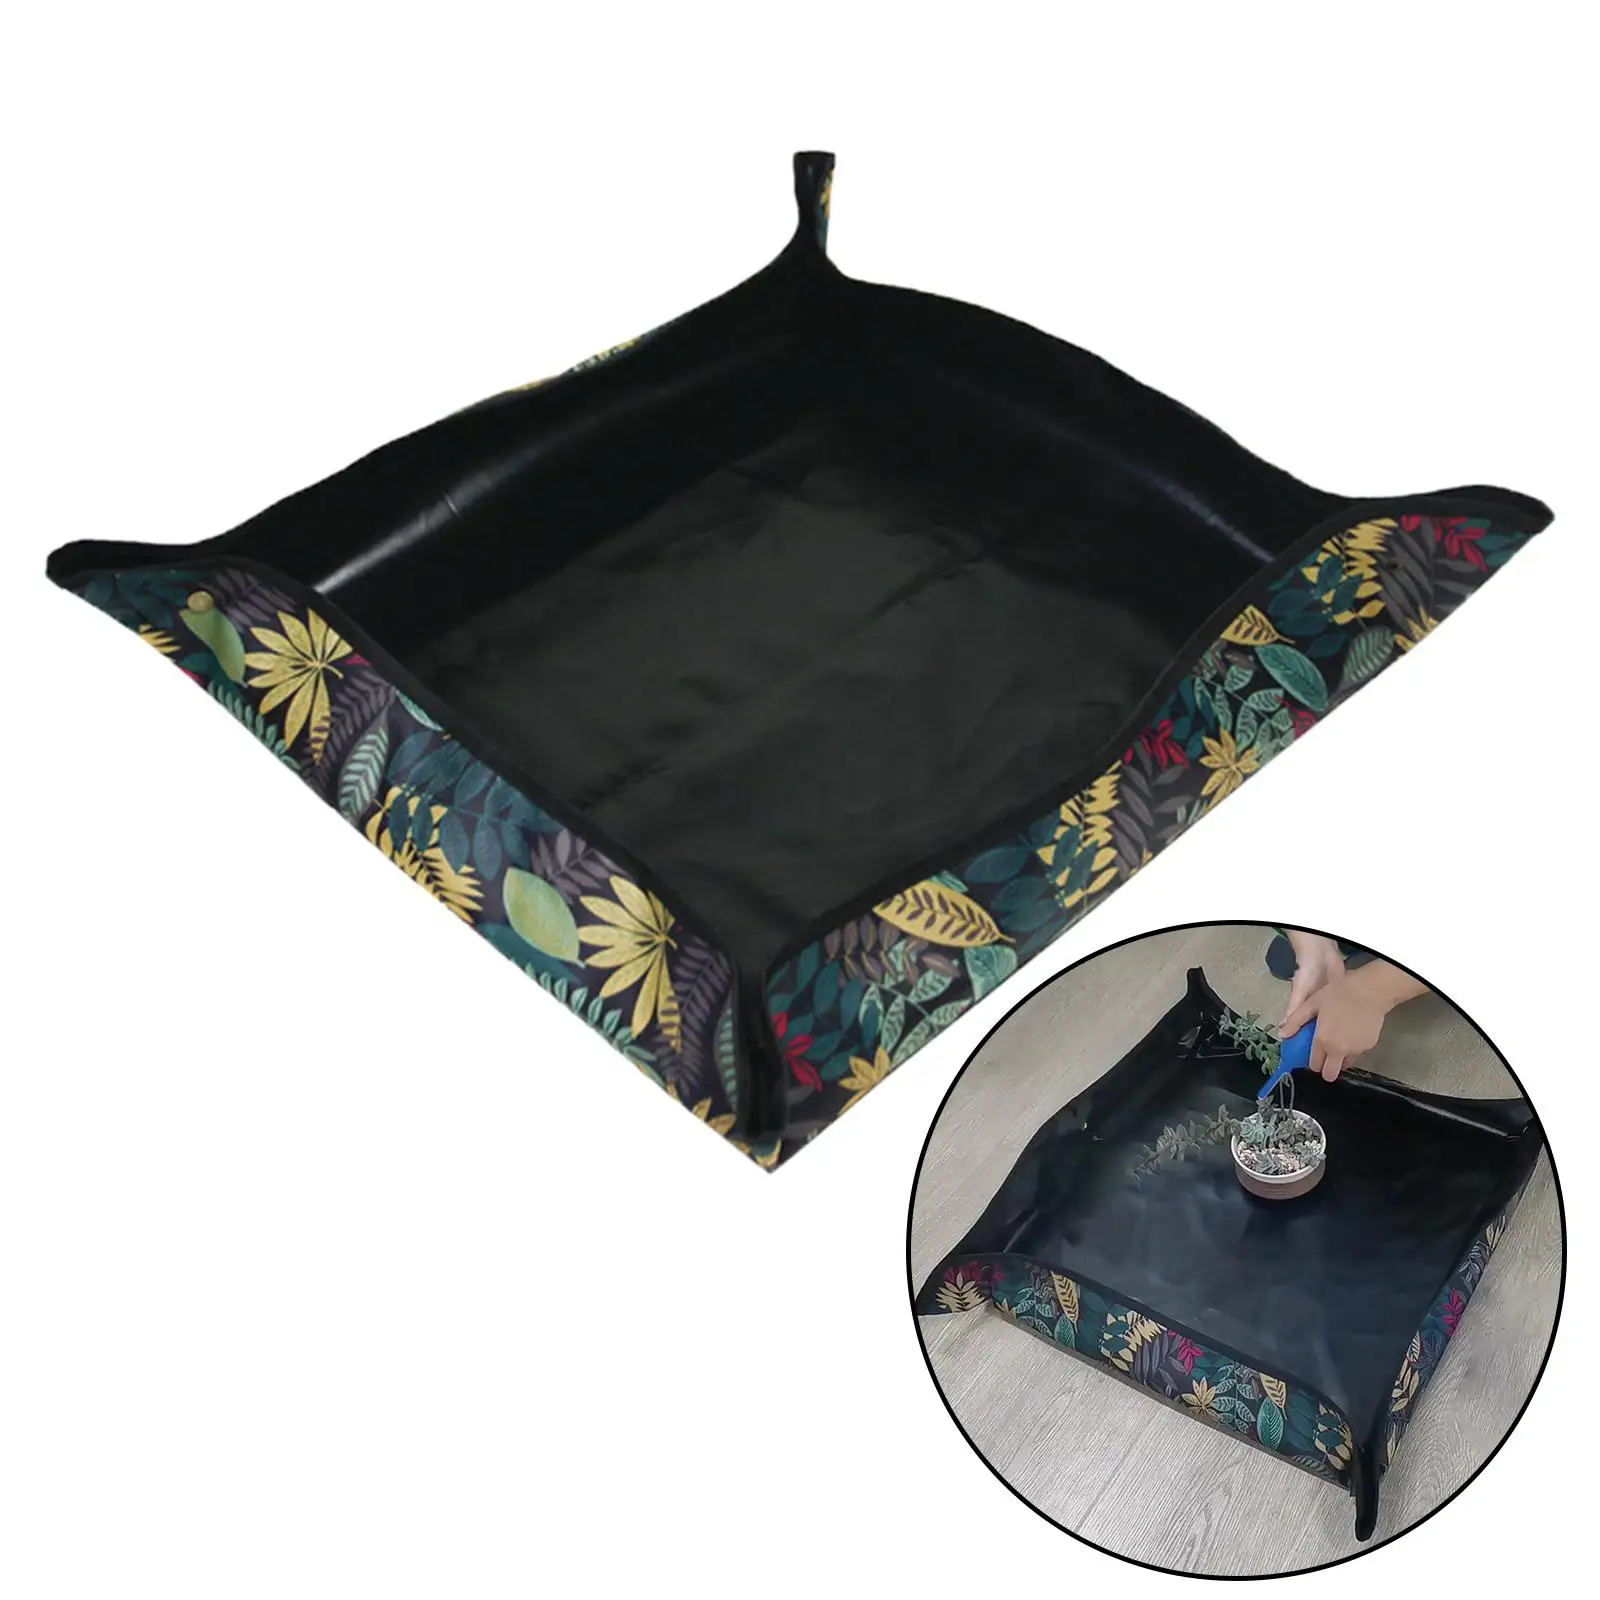 Gardening Mat Waterproof Oxford Cloth with Buckles Repotting Mat for Garden